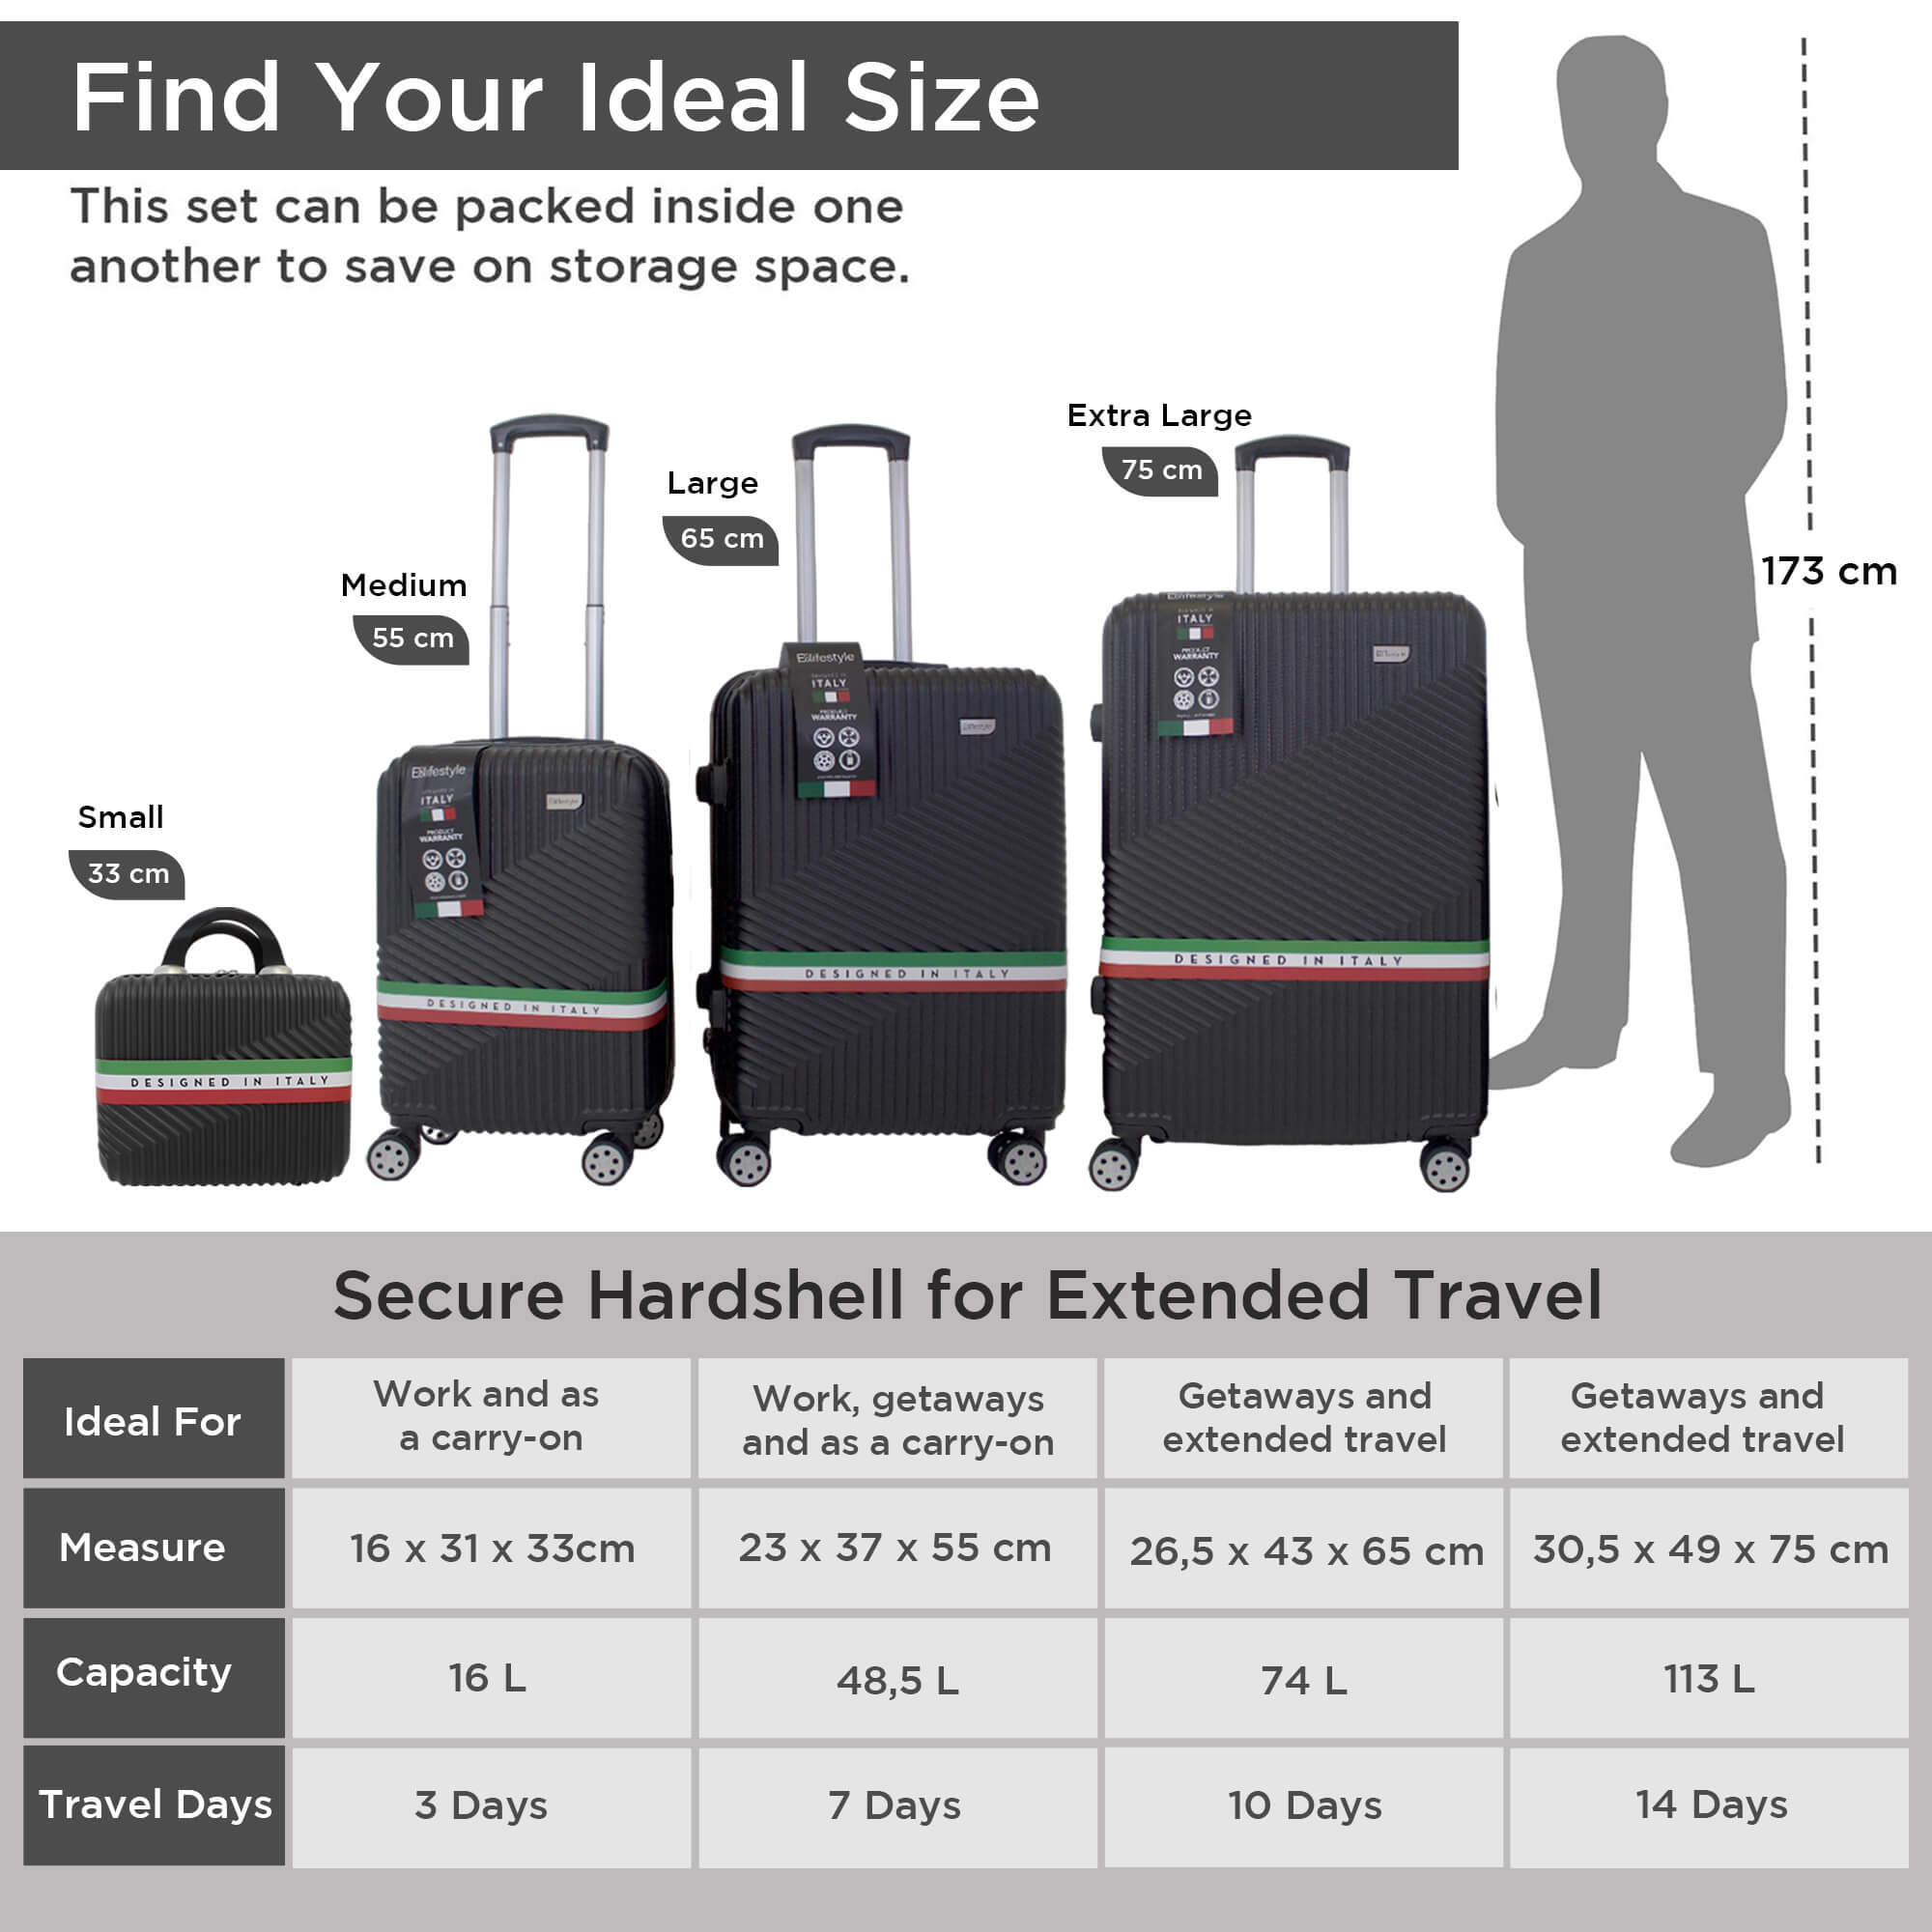 Roma Hardshell Luggage Set on 360° Spinner Wheels with TSA Lock and Protective Cover